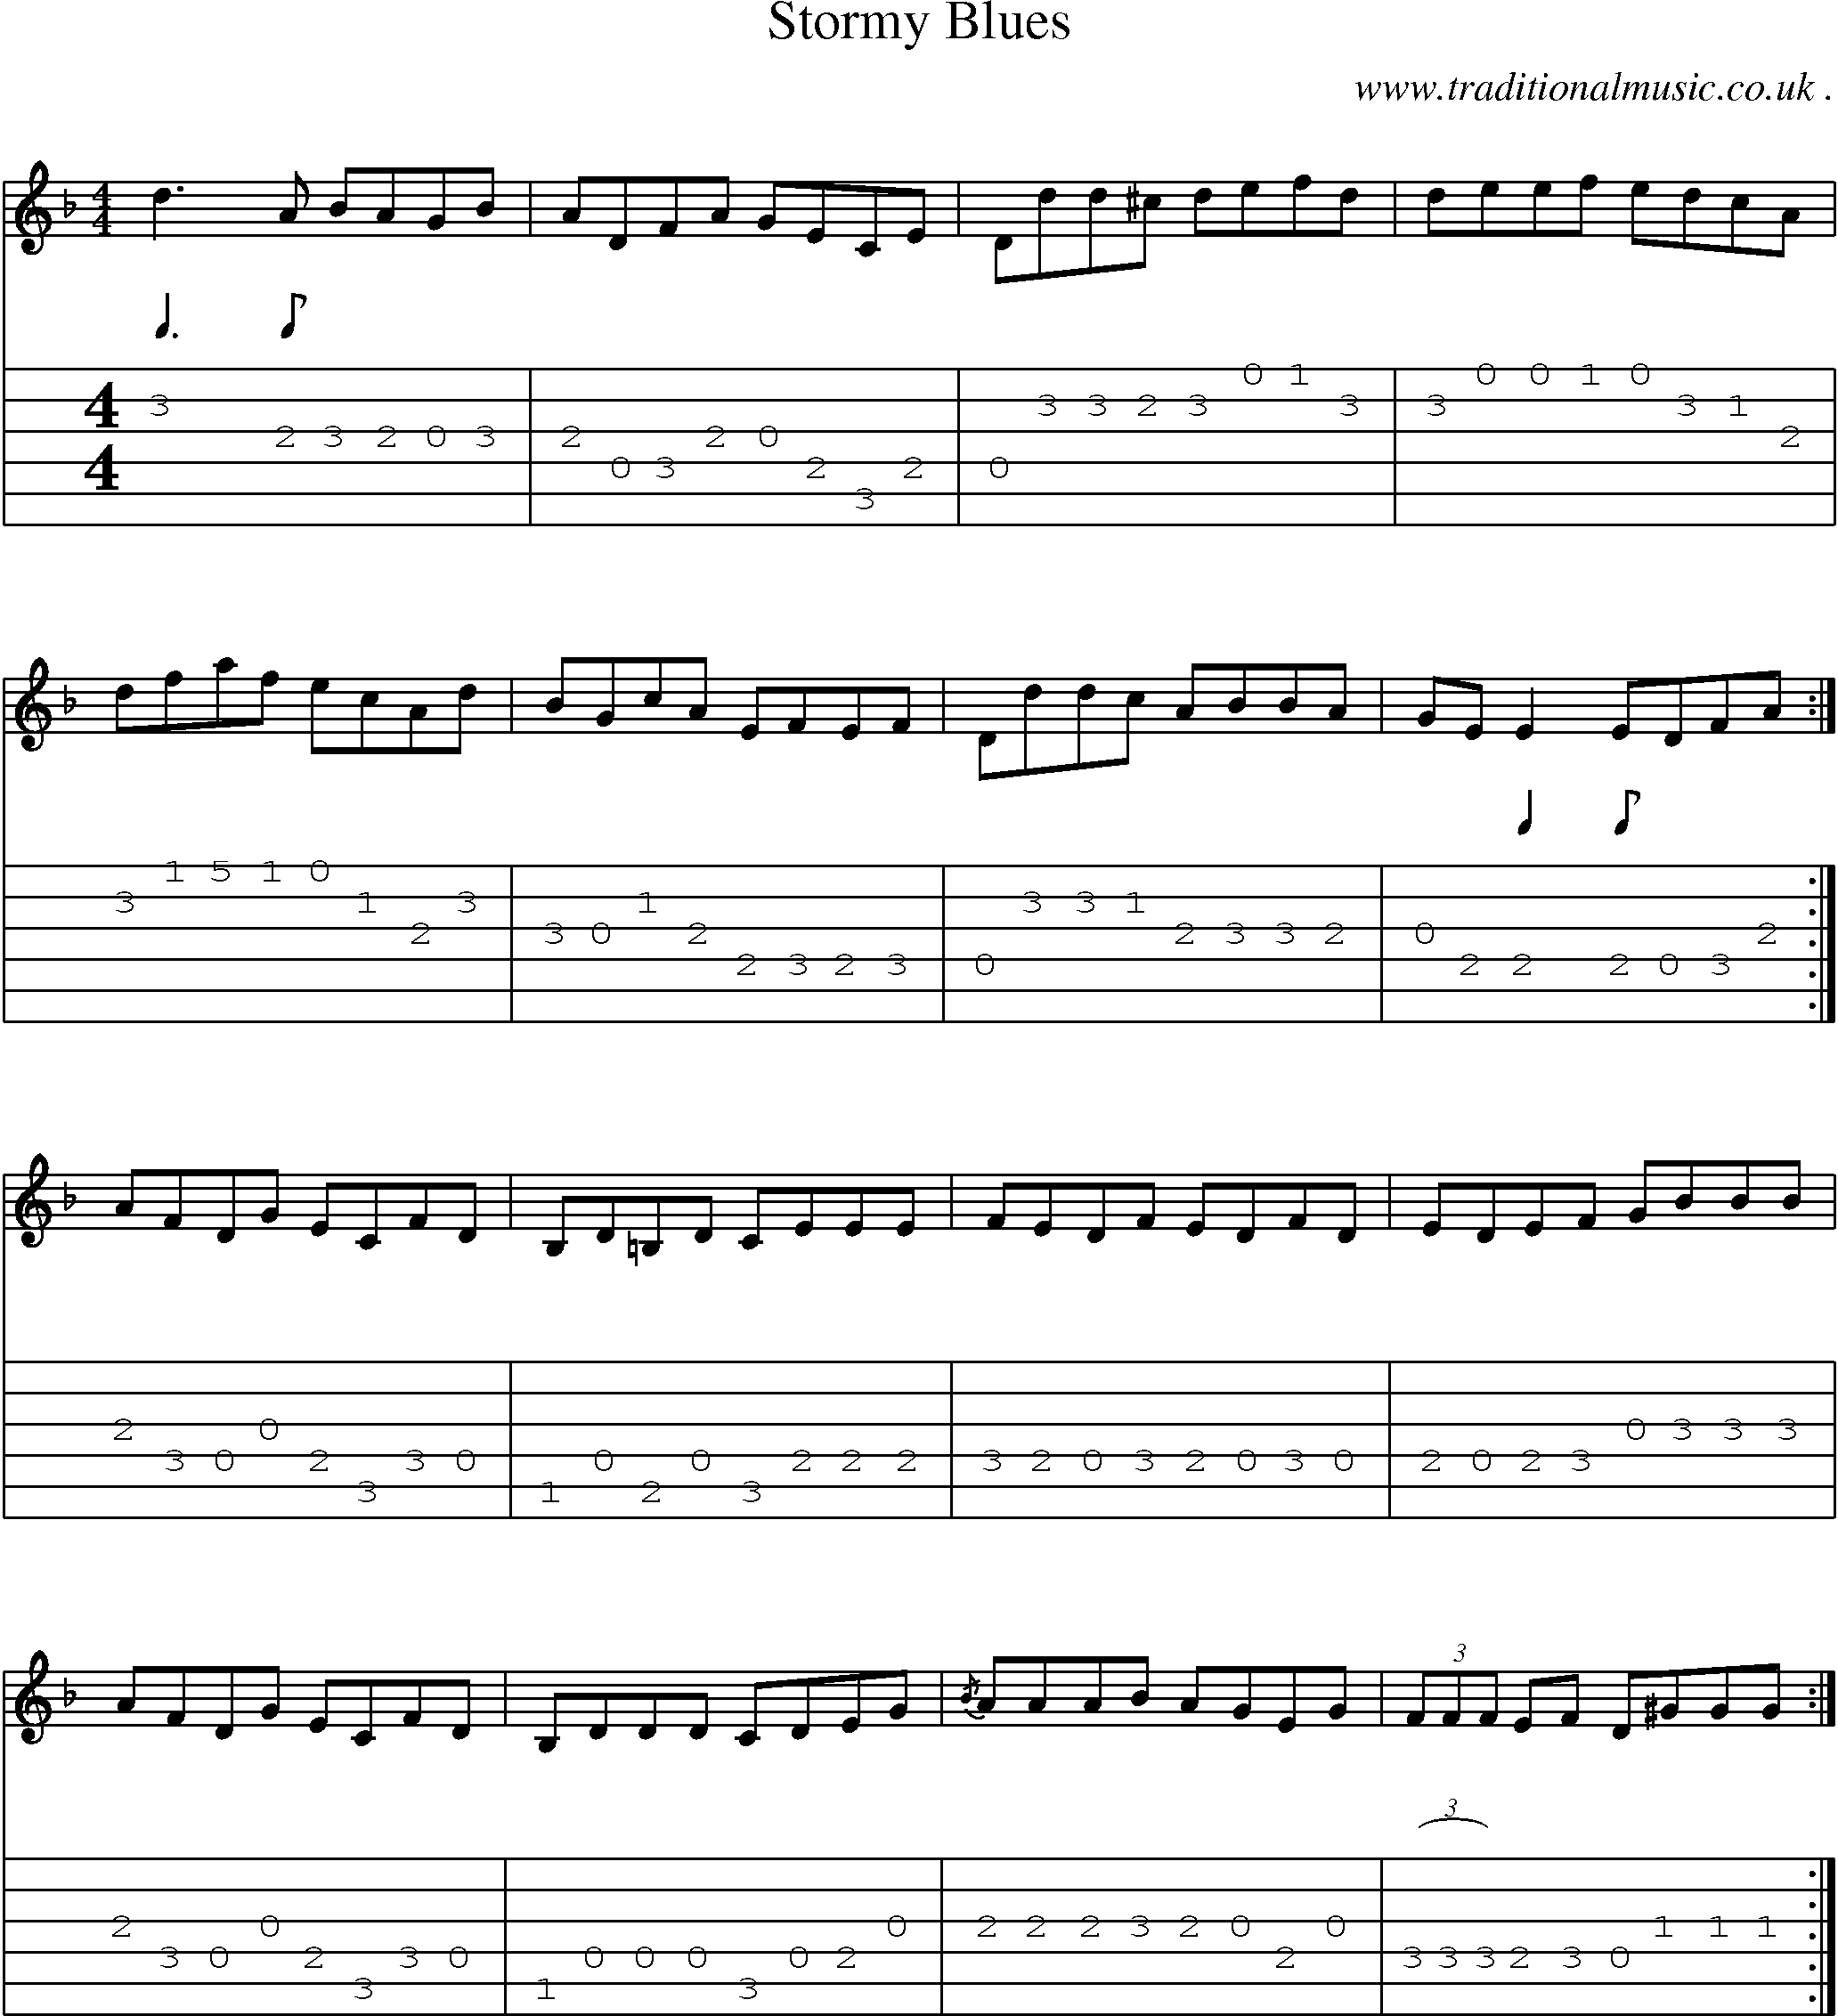 Music Score and Guitar Tabs for Stormy Blues